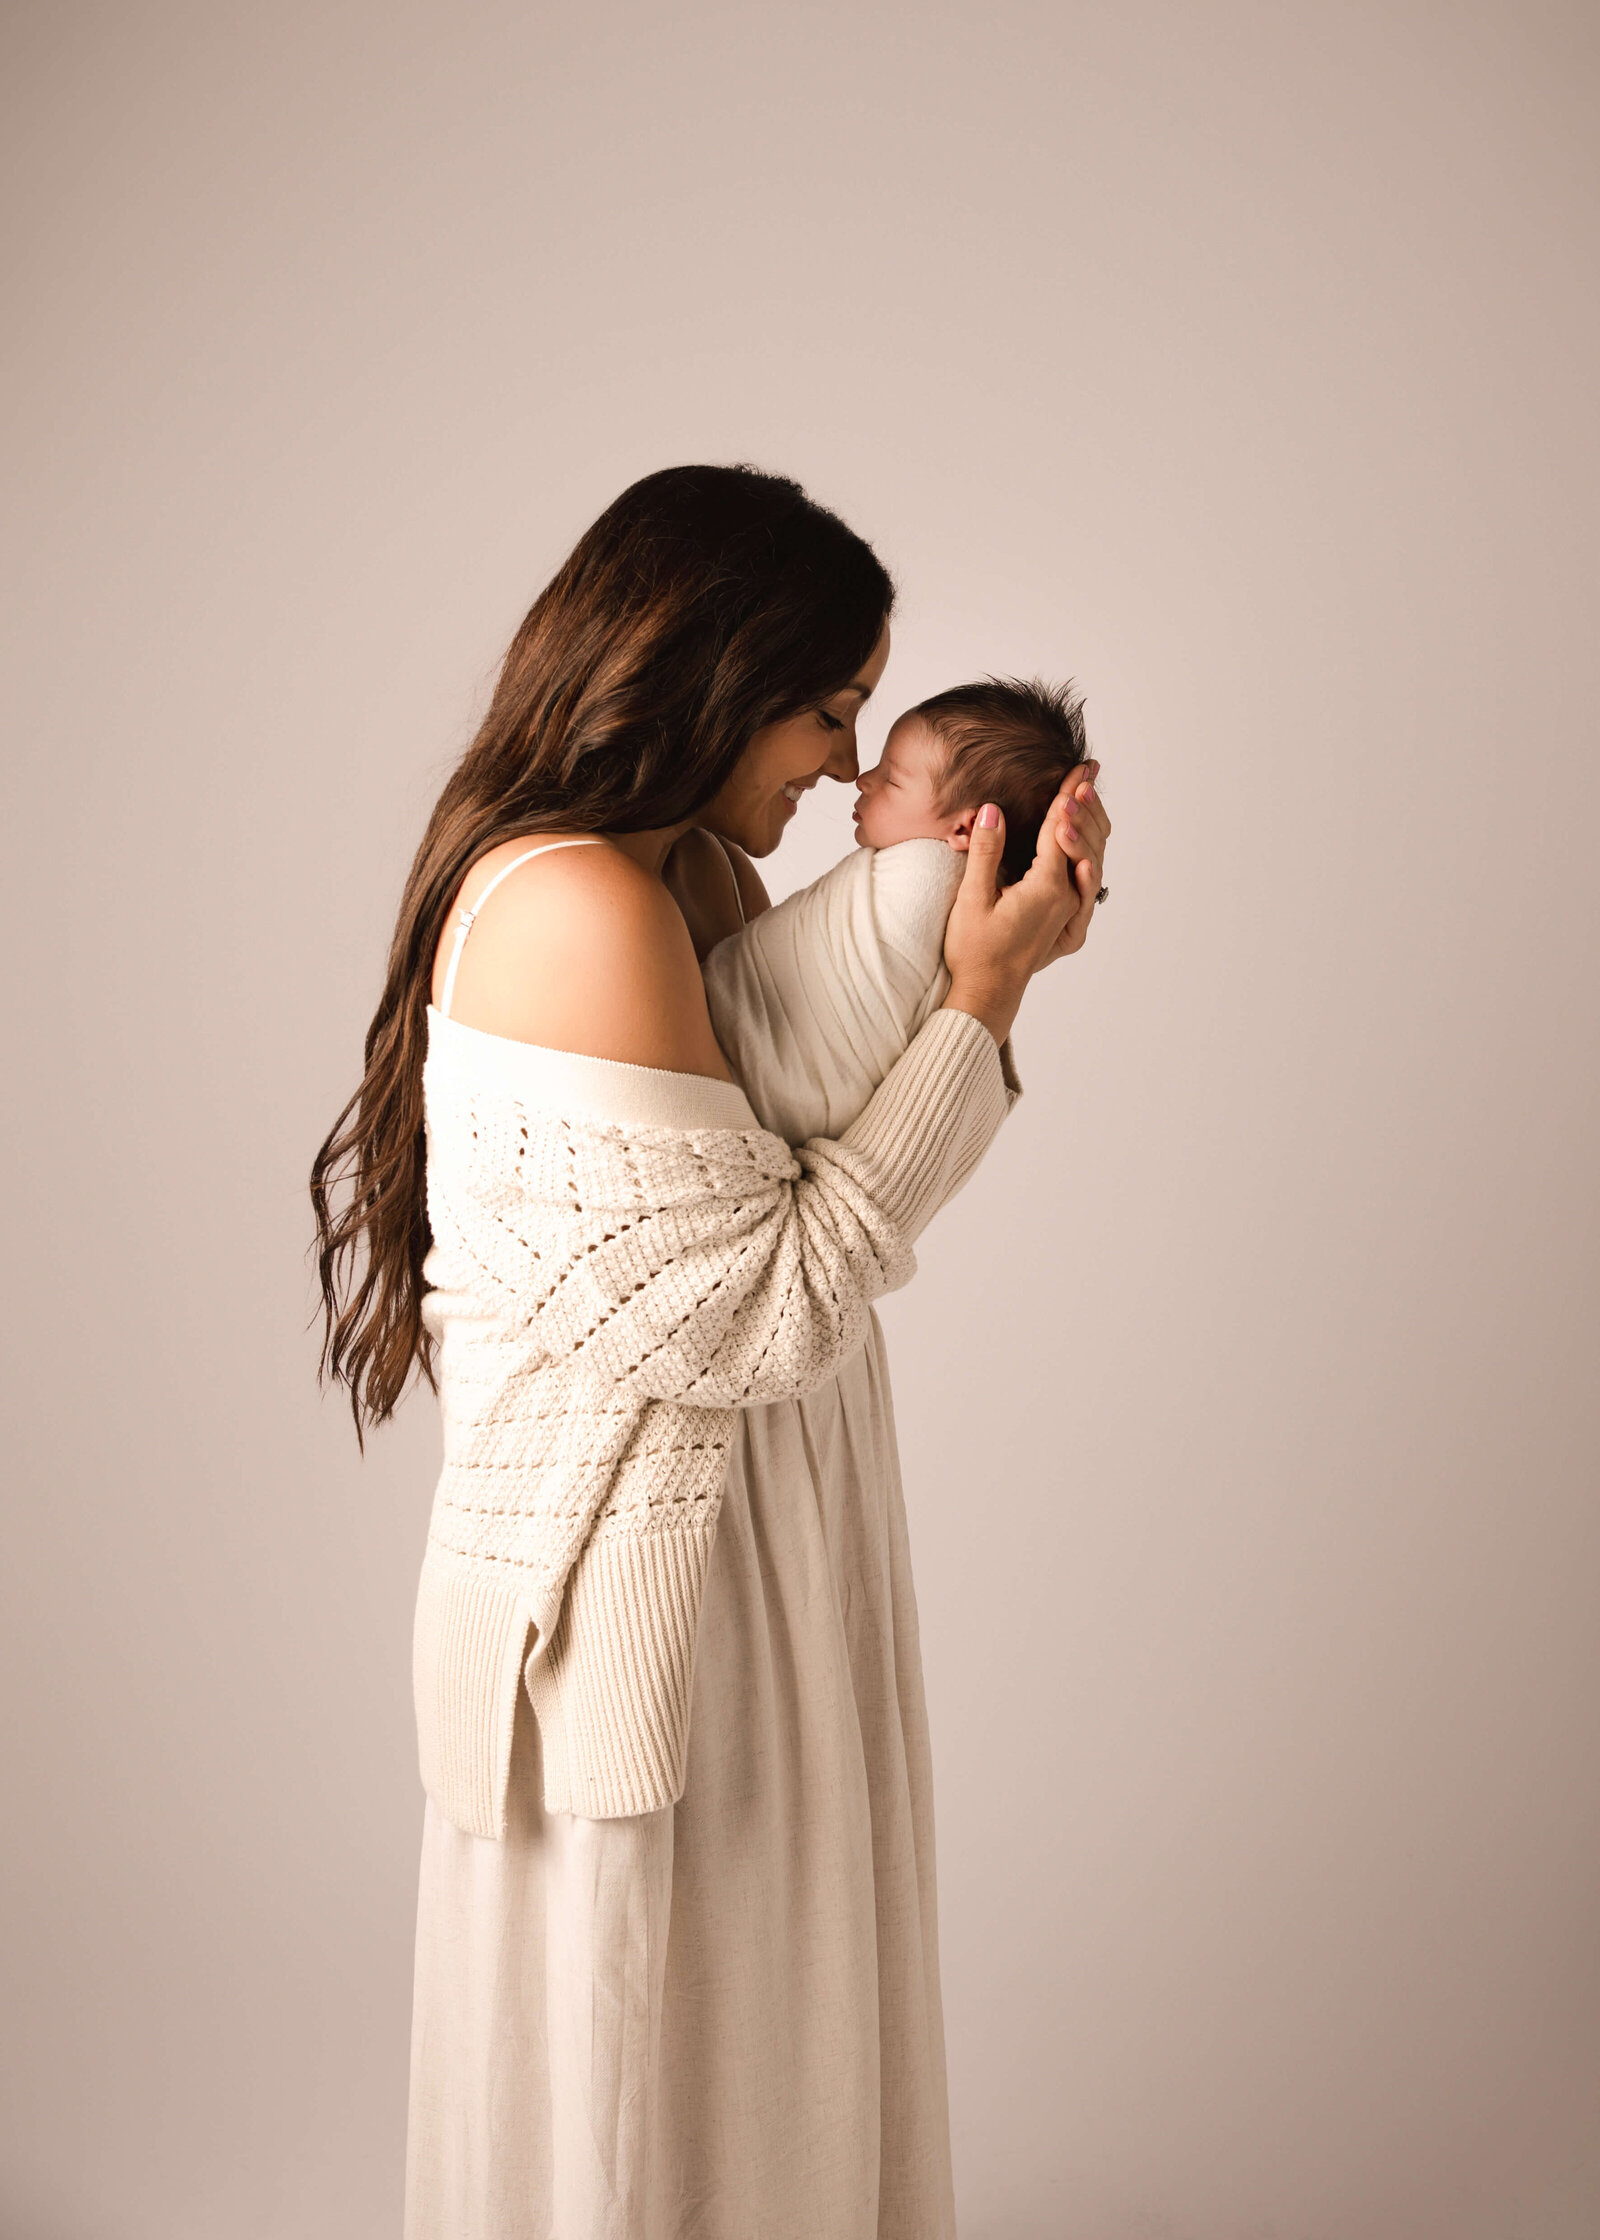 New mom holding her baby boy in newborn session by Ashley Nicole.